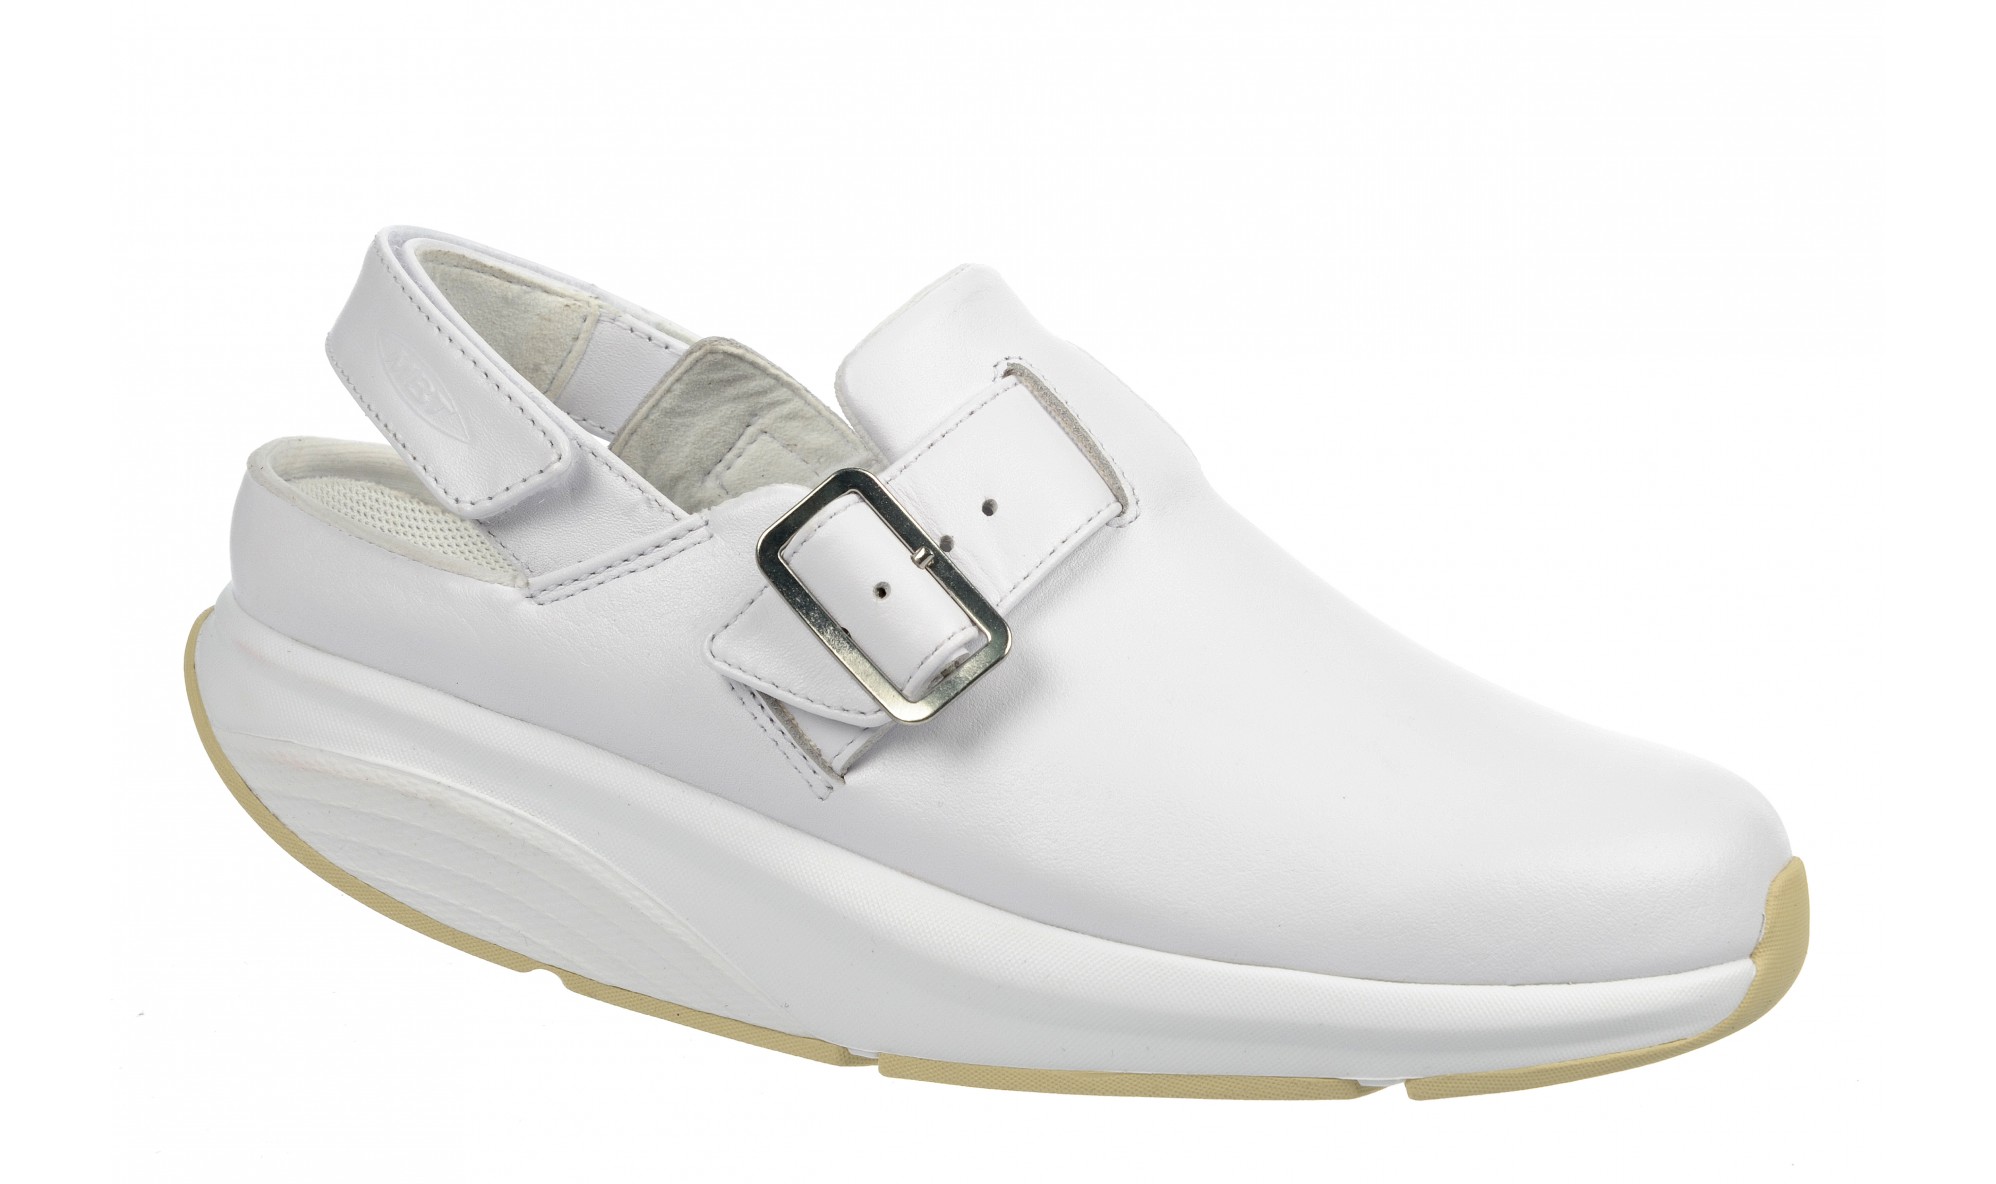 MBT Women's Time Service Clog White 